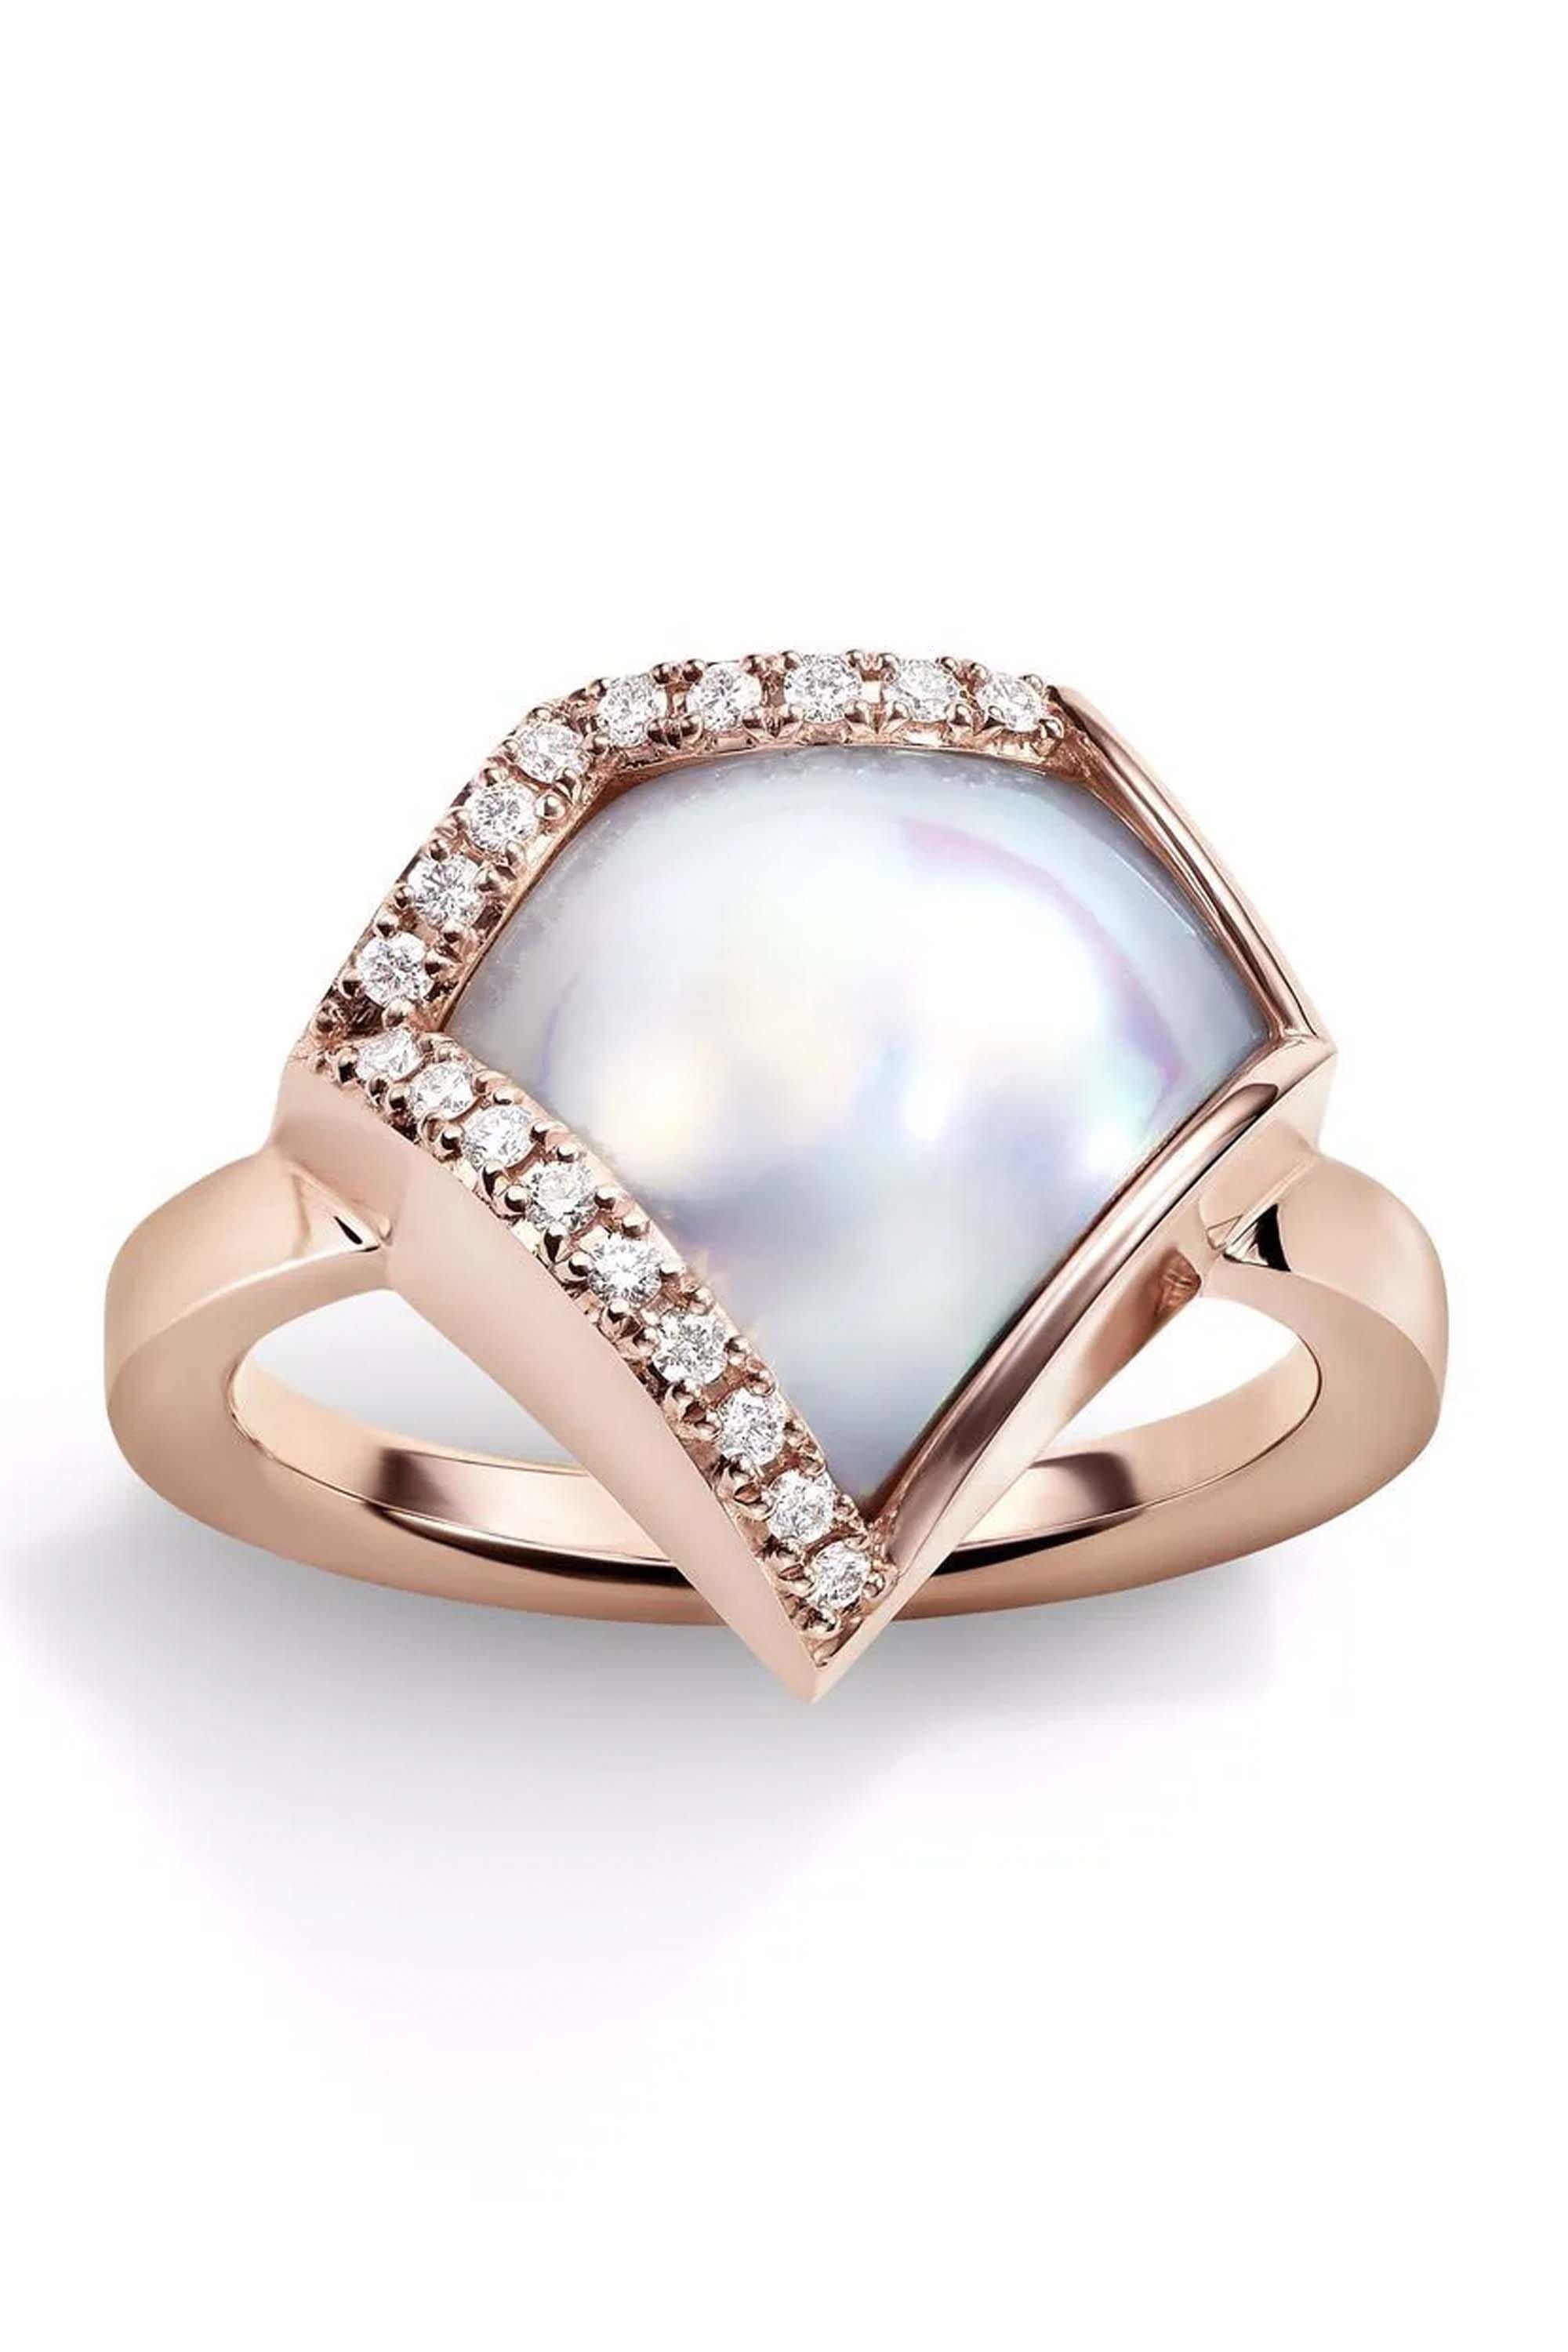 Gorgeous Collar Style Golden Southsea Pearl Ring with Diamonds